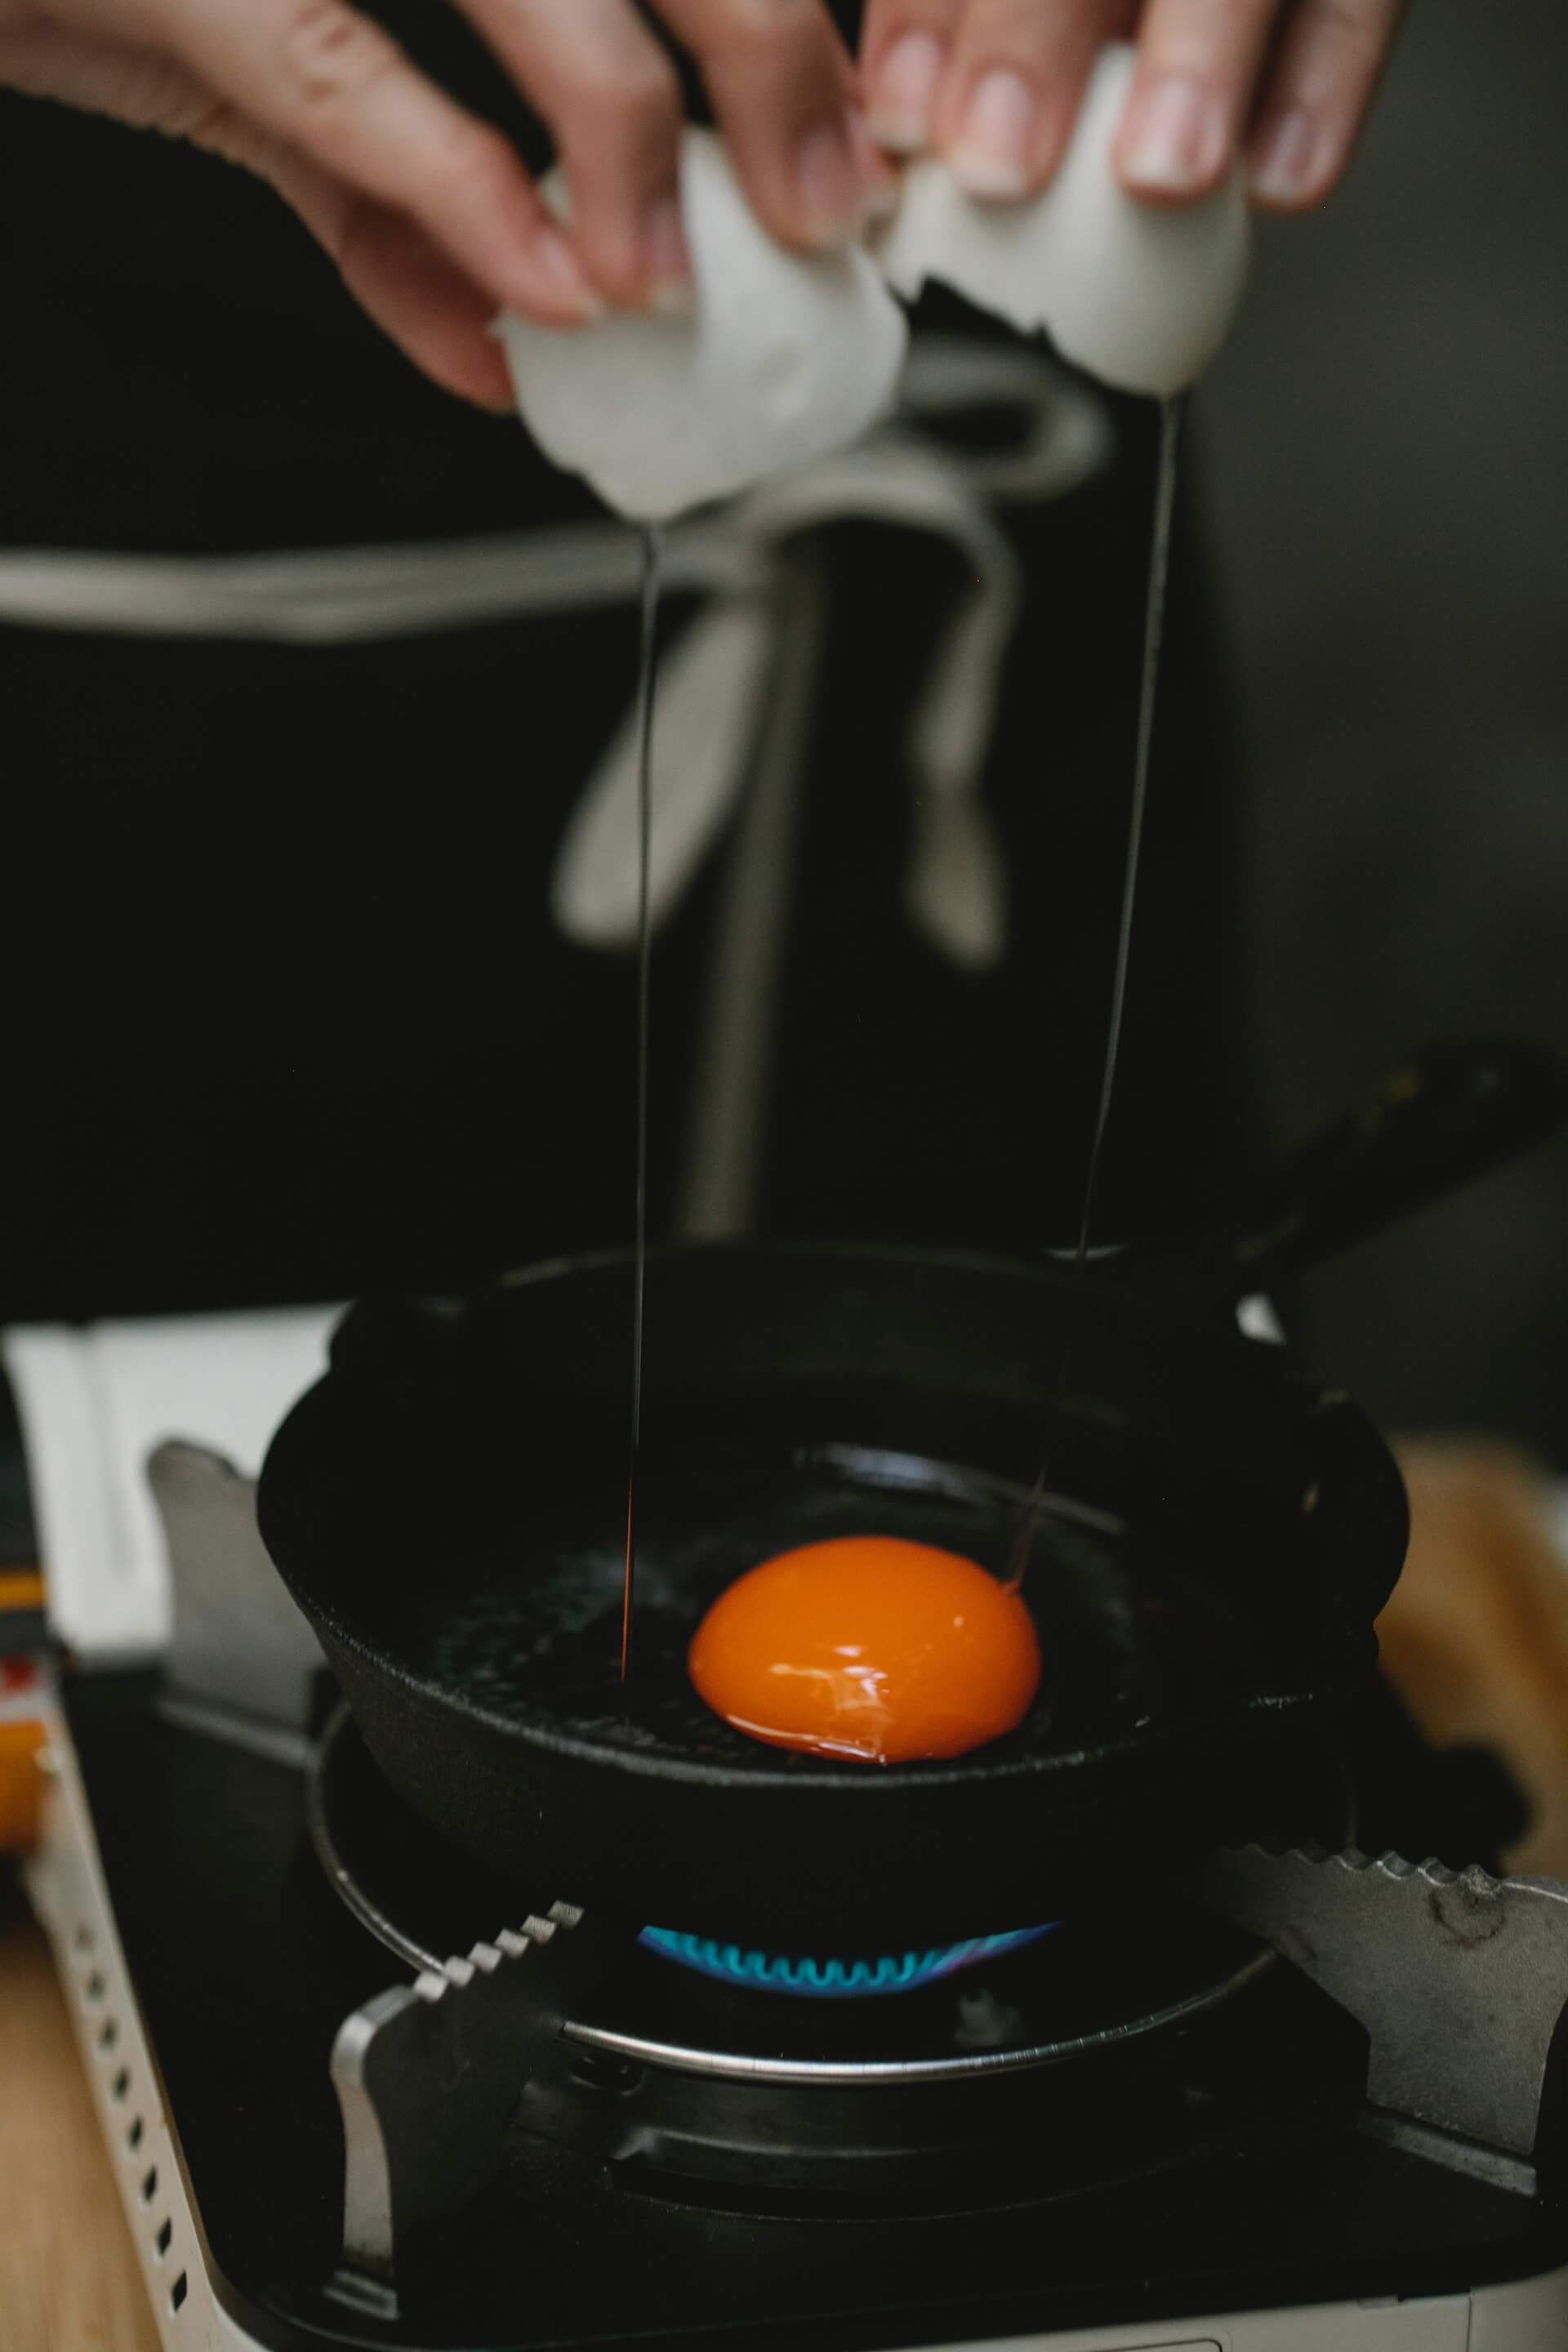 A person cooking eggs on a portable gas cooktop